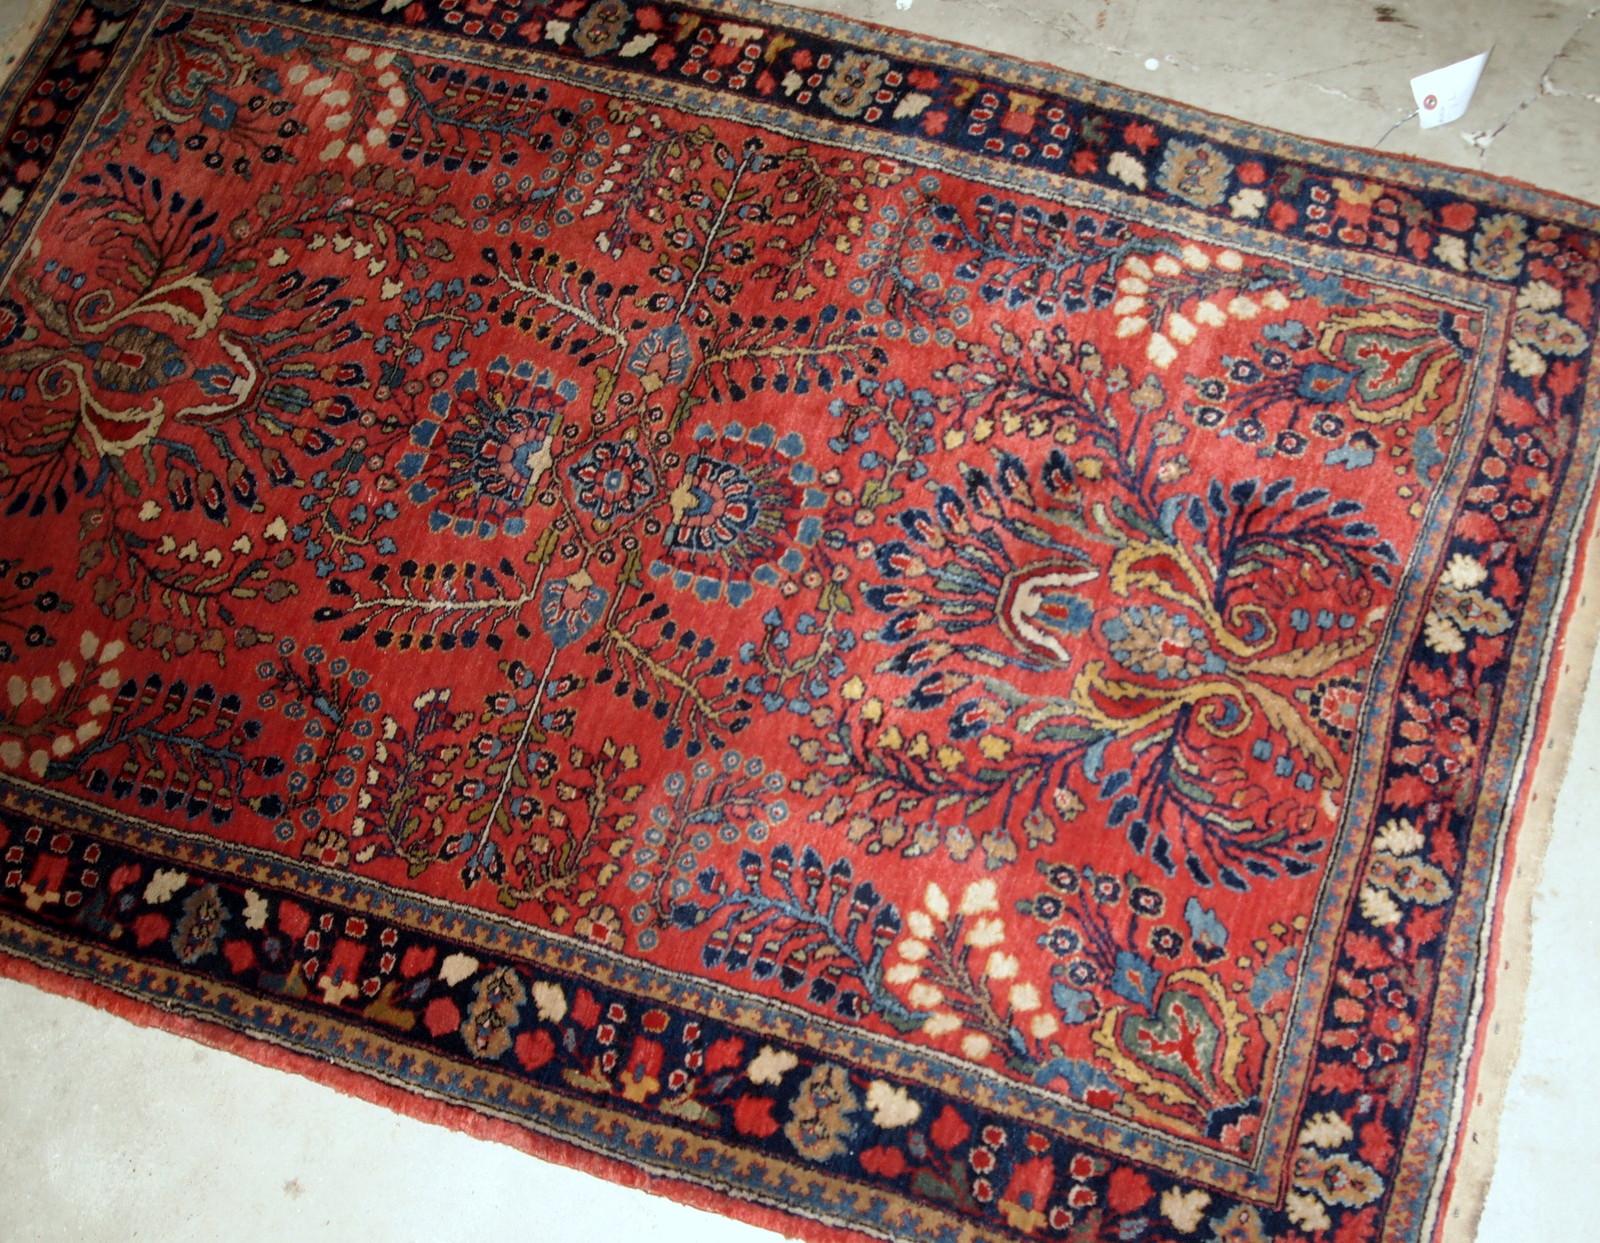 Handmade antique Sarouk rug in red color. The rug is from the beginning of 20th century in original good condition.

?-condition: Original good,

-circa 1920s,

-Size: 3.10' x 5.3' (119 cm x 161 cm),

-Material: Wool,

-Country of origin: